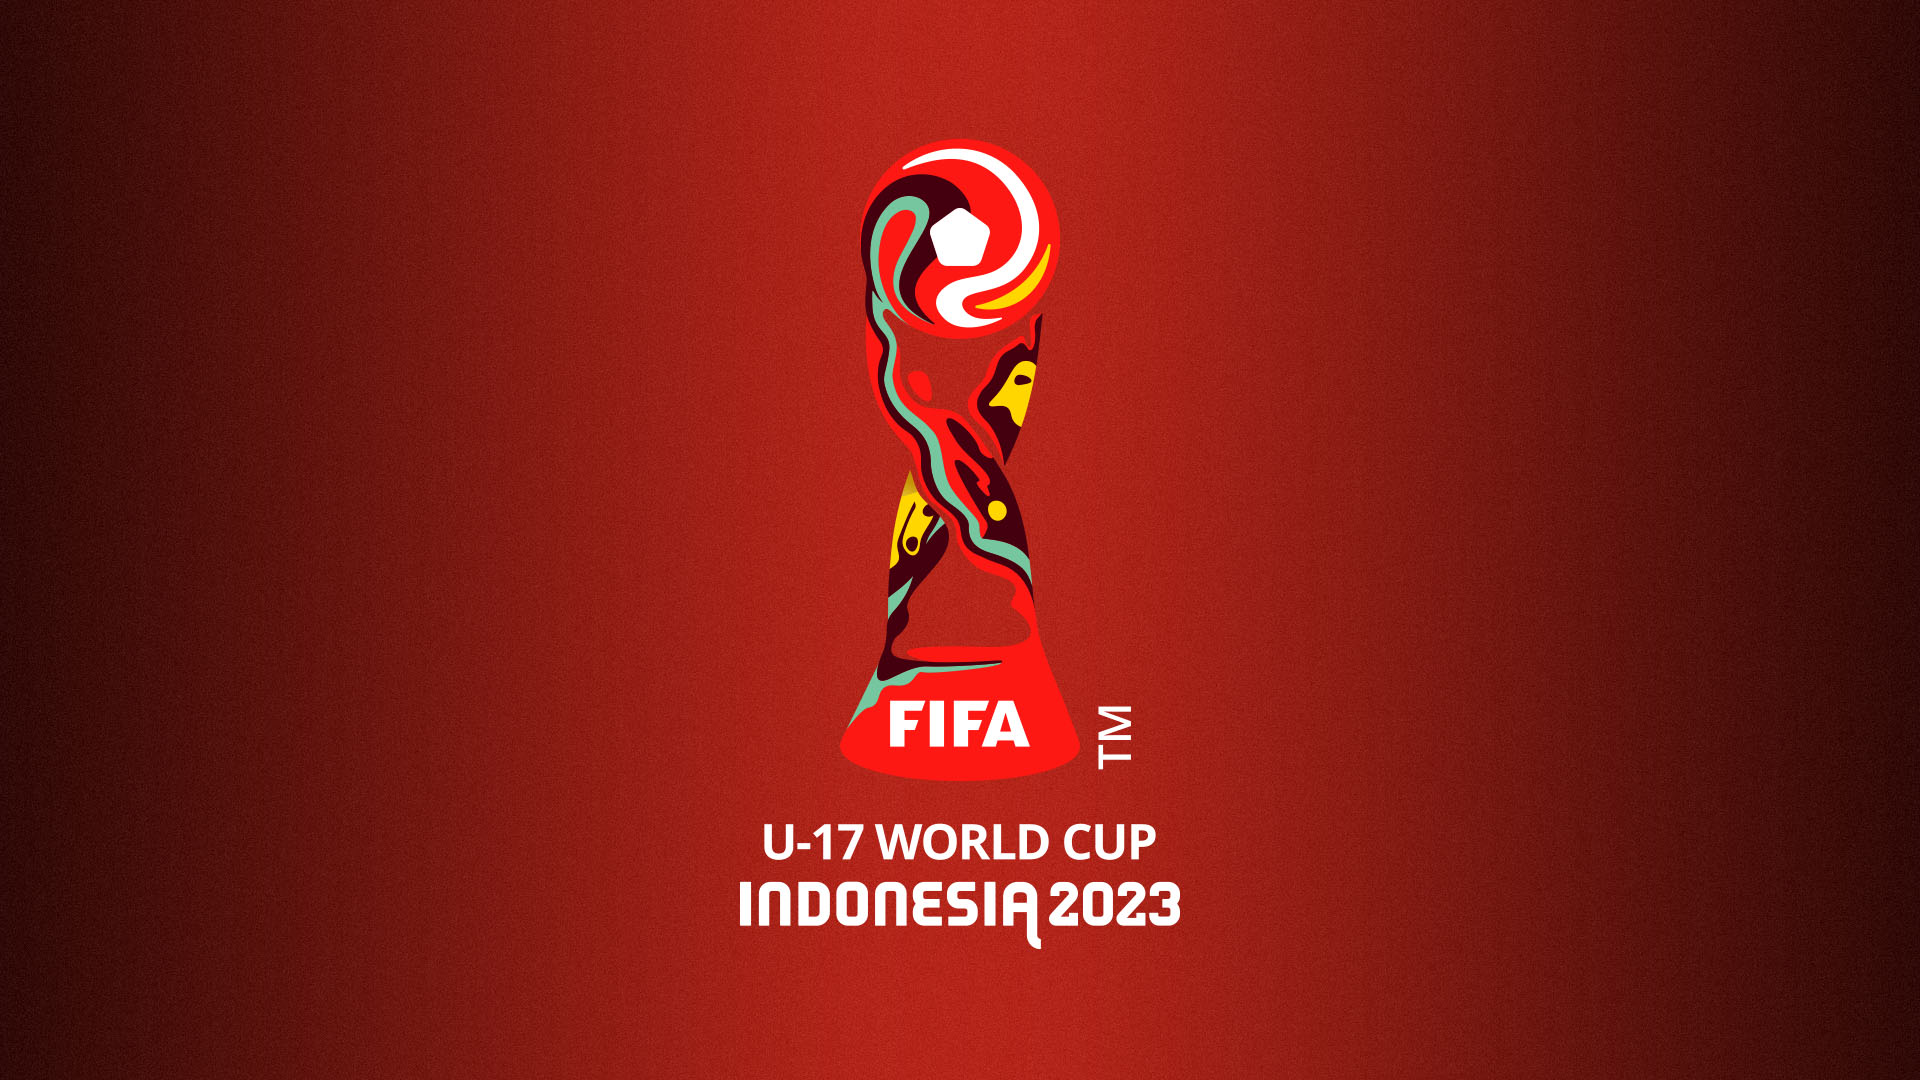 U17 World Cup 2023 schedule: How to watch, TV channel